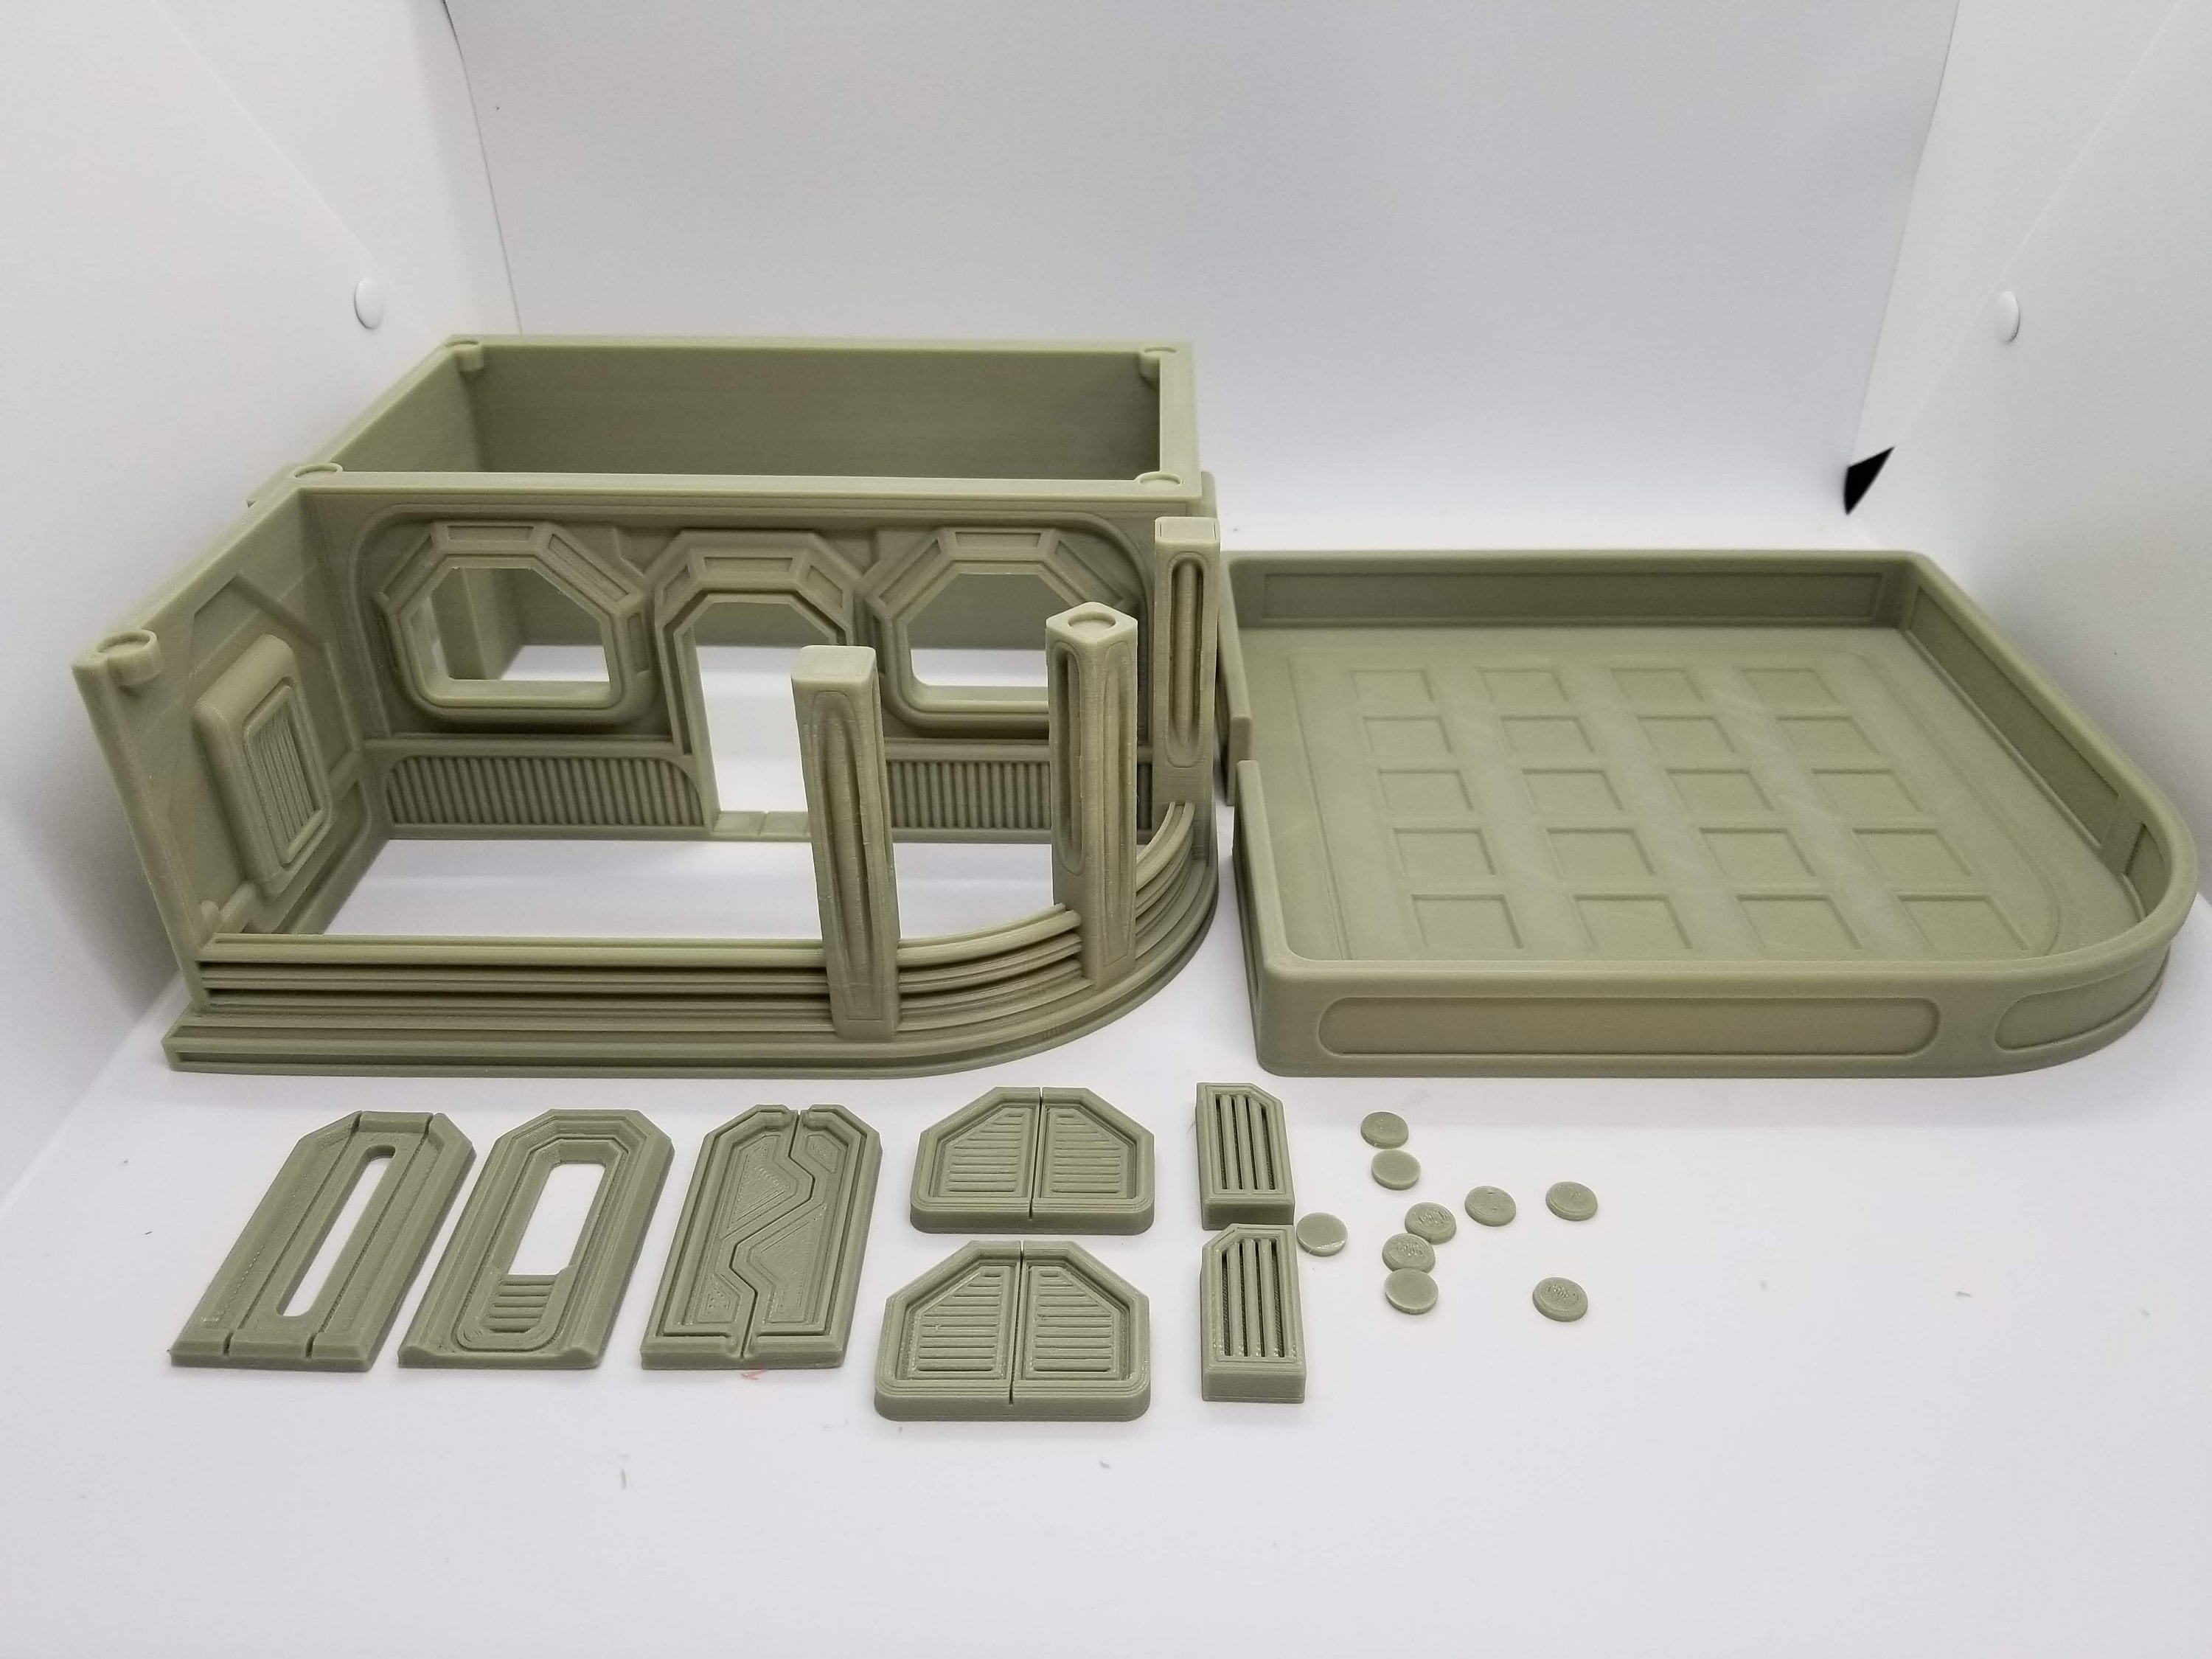 3d Printed Sci-Fi Corner Cafe w/Canopy / Imperial Terrain Licensed On-Line Printer / Print to Order